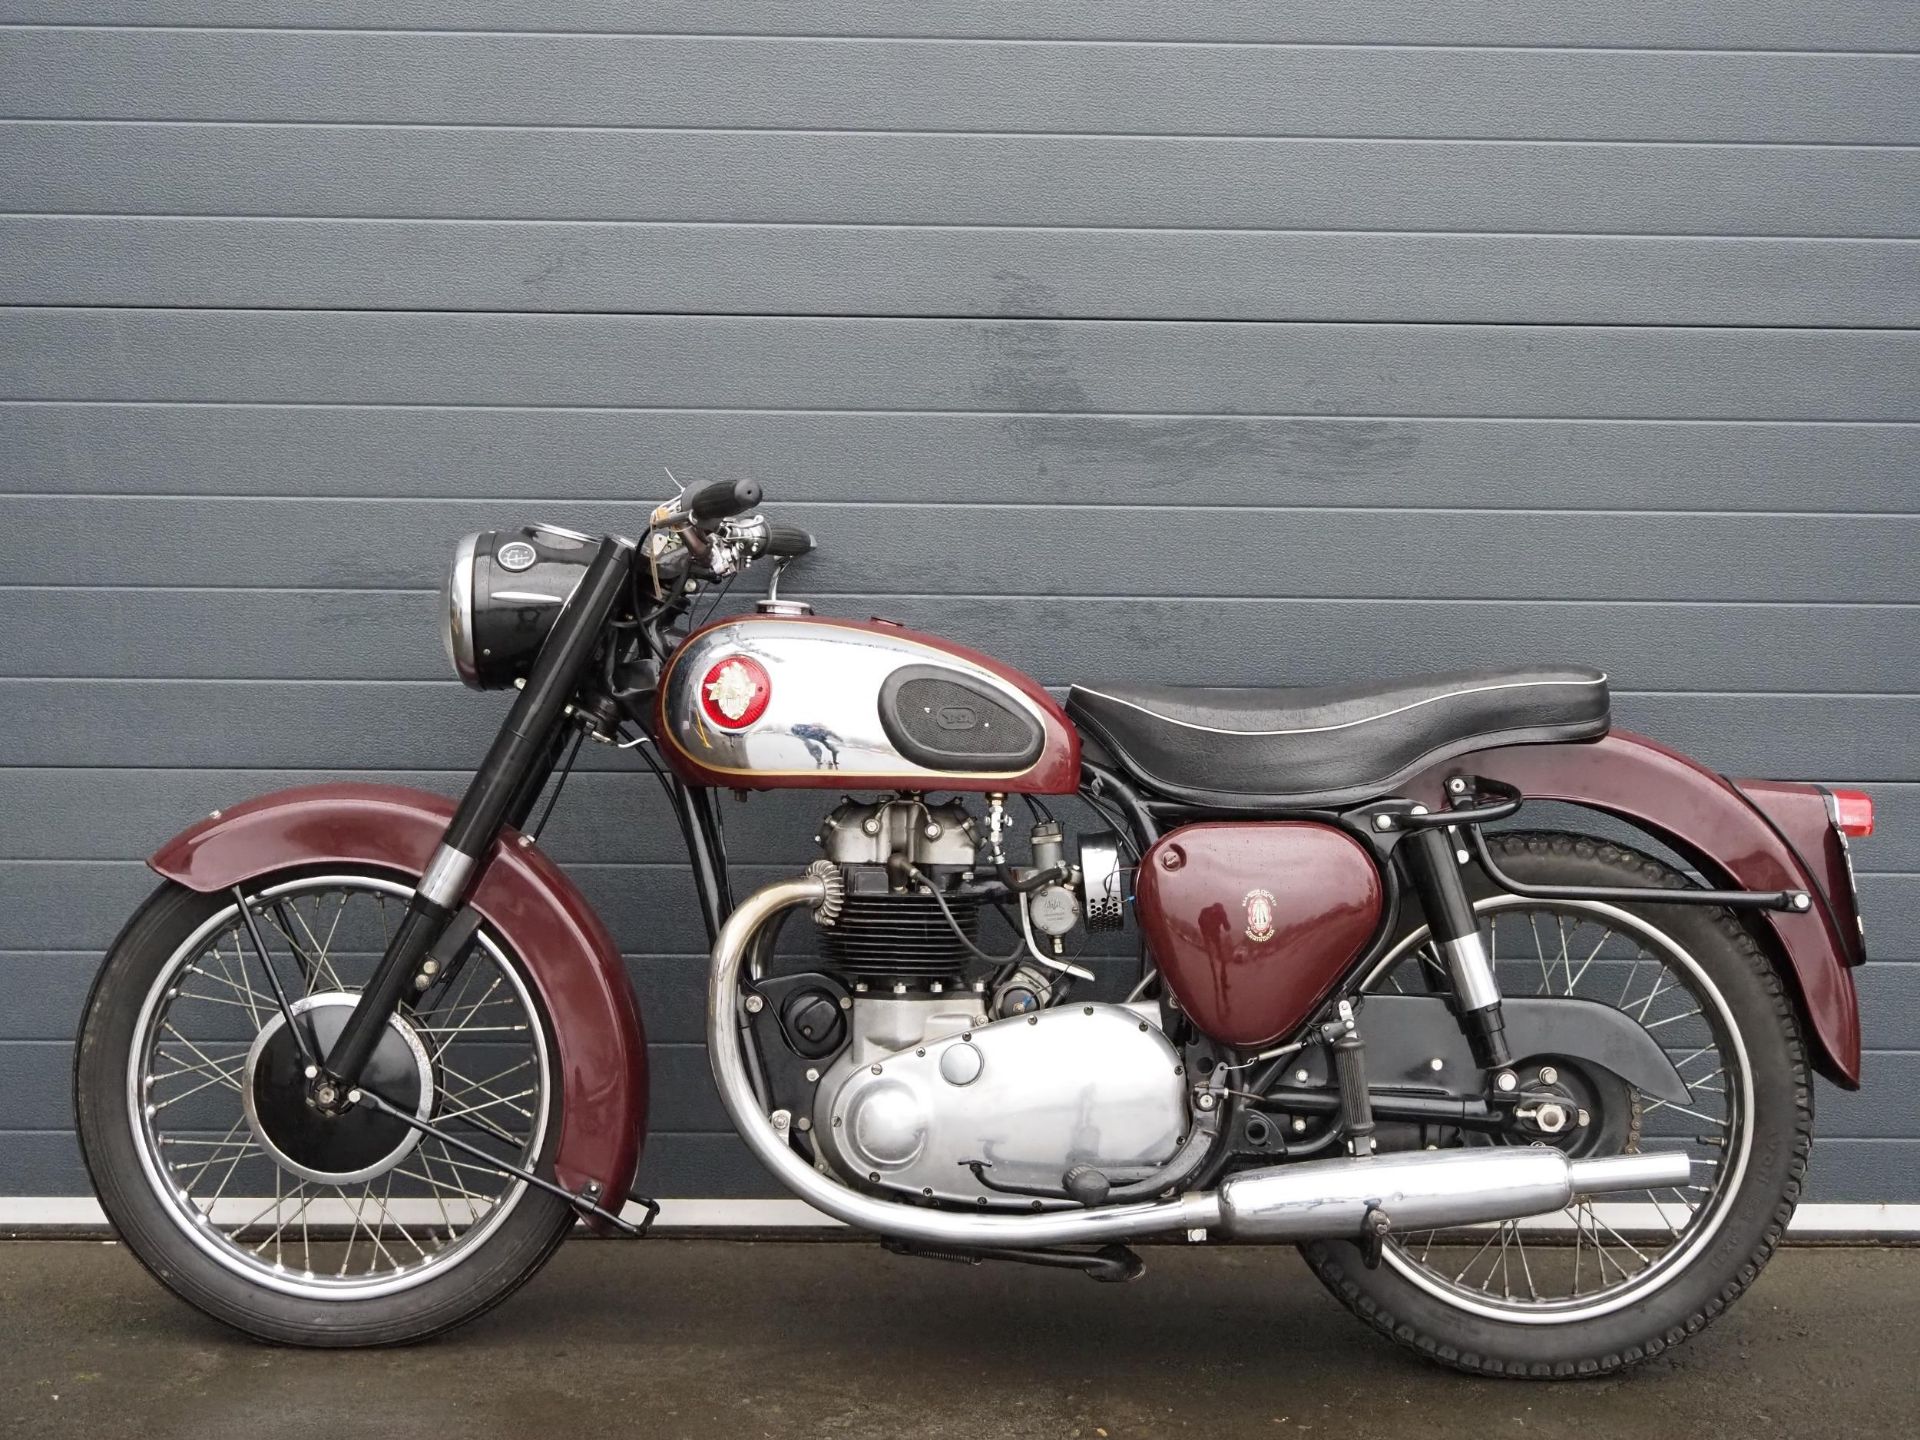 BSA A7 motorcycle. 500cc. 1959. Frame No. A716580 Engine No. CA7 1620 Runs and rides well, lots of - Image 6 of 6